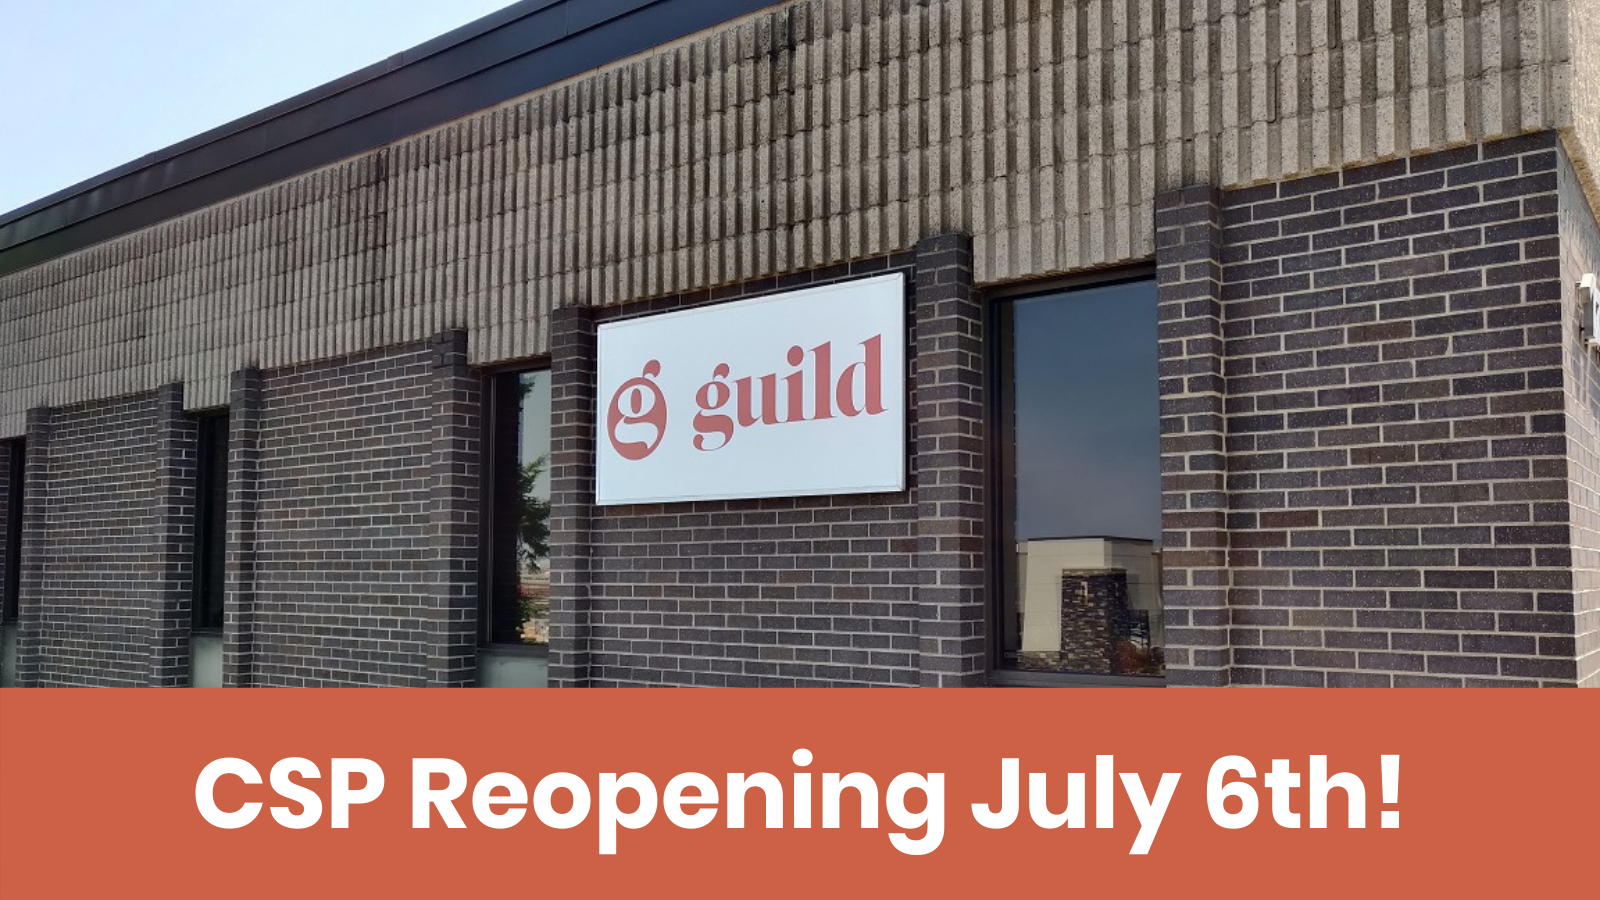 The CSP Building with text that reads "CSP Reopening July 6th!"